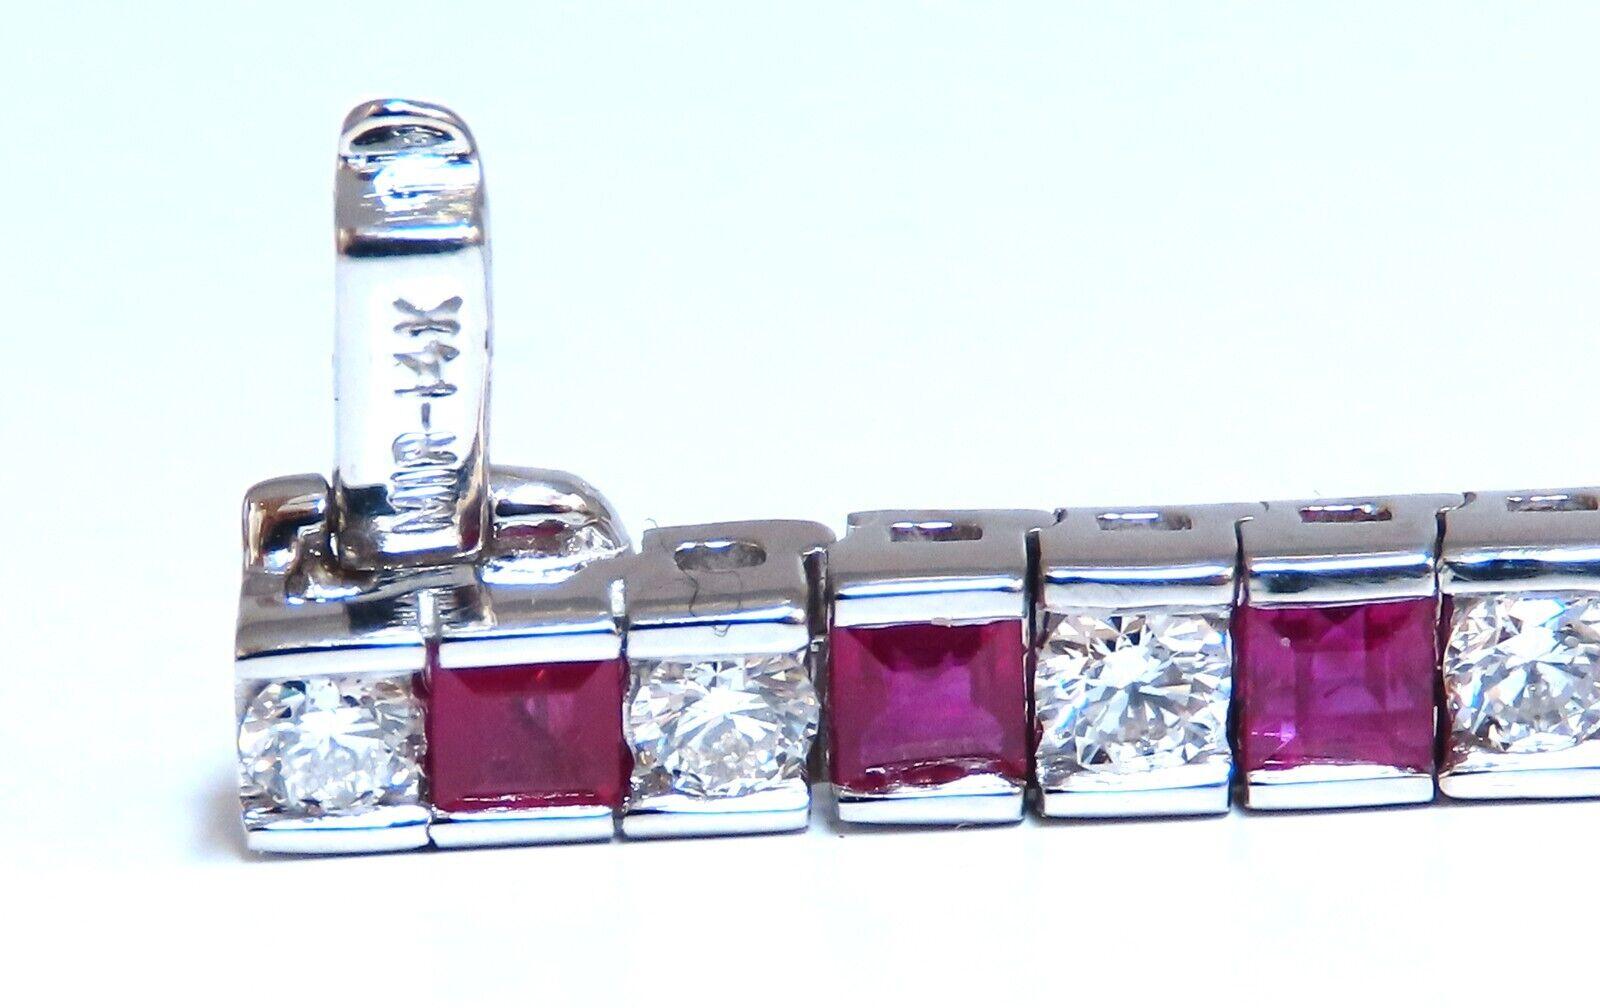 Ruby & Classic Alternating Tennis.

Channel Prime

7ct. Natural ruby bracelet.

Baguette, full cuts 

Clean clarity

Transparent & Even Reds.

3.03ct Natural Diamonds

Rounds & full cuts

Vs-2 clarity G-color

14kt. white gold 

17 Grams.

7 inch